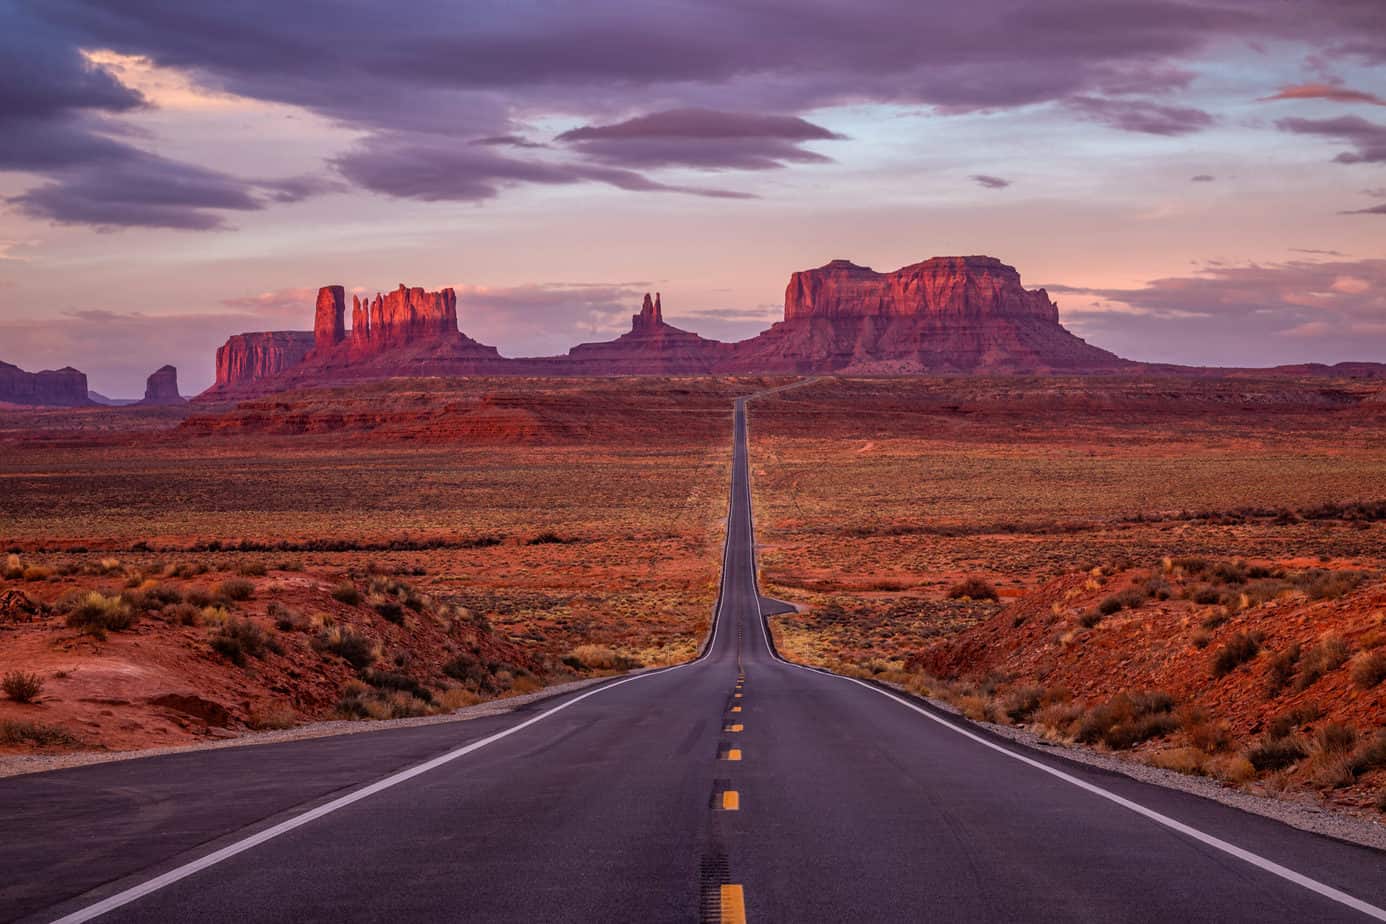 Empty road leading to giant red rock formations in the distance under a purple sky.